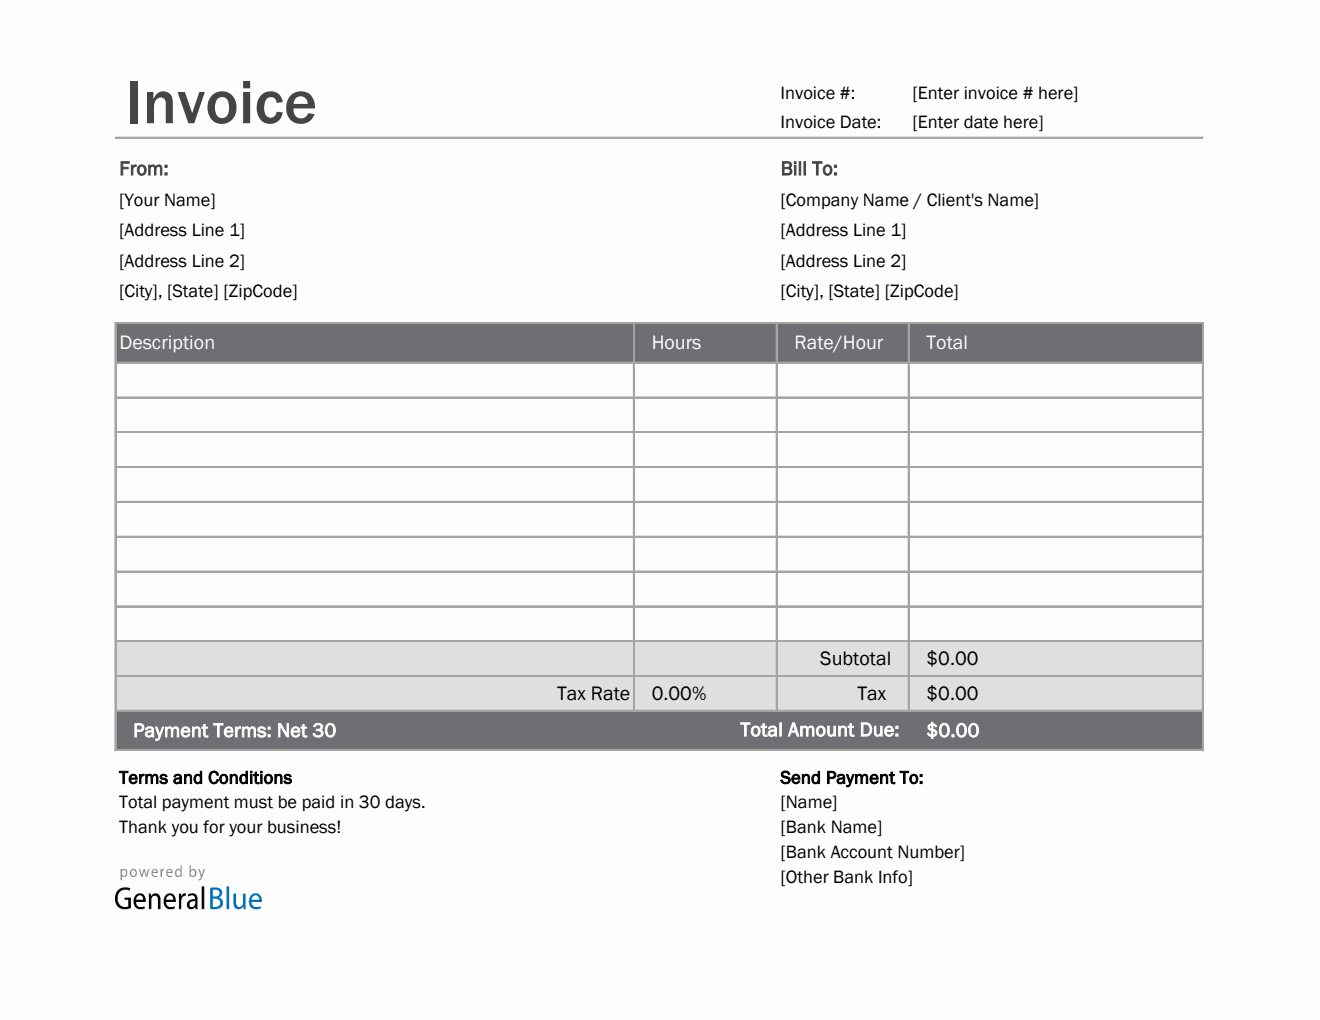 Excel Invoice Template for U.S. Freelancers With Tax calculation (Simple)